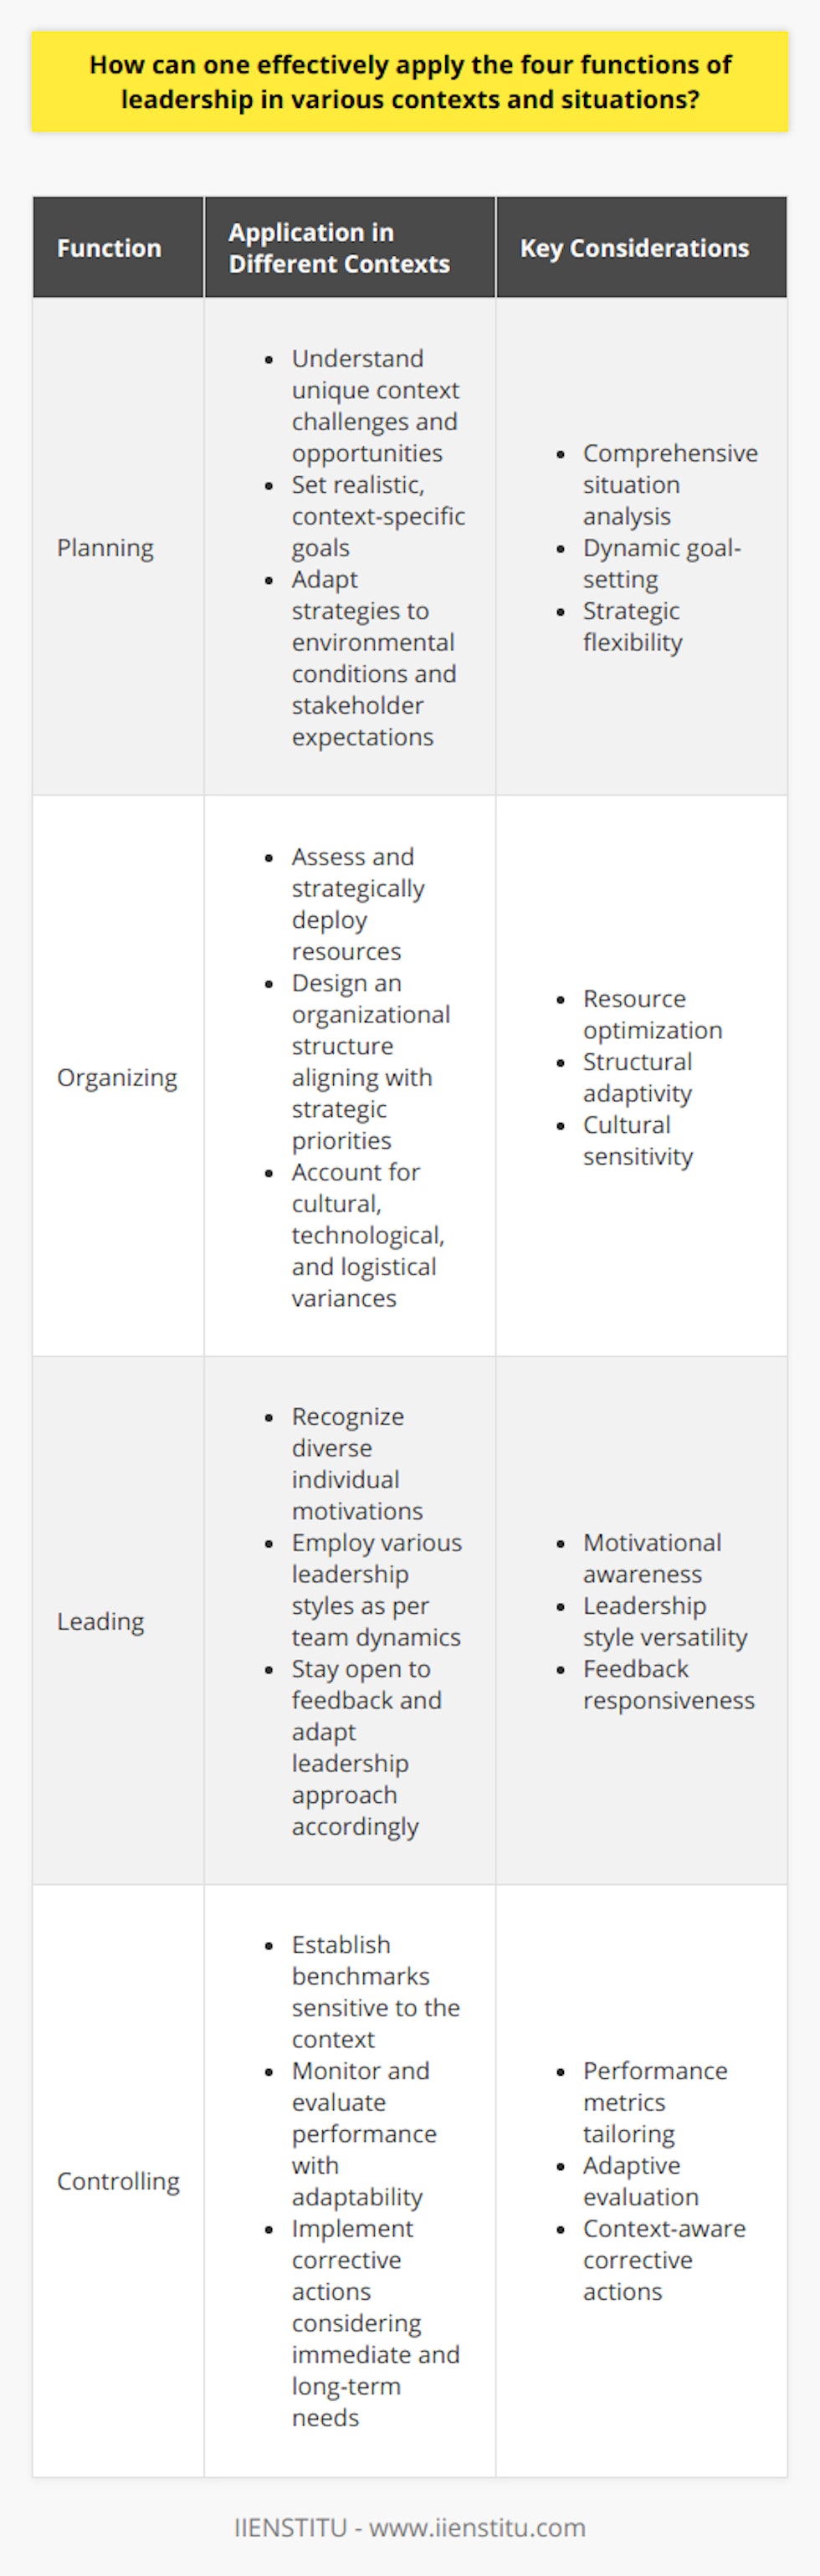 Effective leadership requires the mastery of several key functions, including planning, organizing, leading, and controlling. These functions are a cornerstone of successful management and can be applied across different contexts and scenarios, from business to community organizing. Here's how one can effectively apply these functions:1. Planning in Diverse Settings:   - Understand the unique challenges and opportunities of each context.   - Set realistic and context-specific goals based on thorough situation analysis.   - Adapt strategies to suit different environmental conditions, stakeholder expectations, and resource availabilities.2. Organizing with Flexibility:   - Assess the resources at hand and deploy them where they can be most effective.   - Design an organizational structure that reflects the strategic priorities of the context.   - Make allowances for cultural, technological, and logistical differences that influence task assignments and workflows.3. Leading with Adaptability:   - Recognize the varied motivations and drives of individuals within different scenarios.   - Employ a range of leadership styles to suit different team dynamics — sometimes directive, sometimes collaborative.   - Remain open to feedback and be prepared to alter your leadership approach in response to situational changes.4. Controlling with Sensitivity to Context:   - Establish appropriate benchmarks and performance indicators that reflect the nuances of each situation.   - Monitor and evaluate performance in a manner that is both rigorous and adaptive to changes.   - Implement corrective actions that recognize the immediate and long-term needs of the organization and its stakeholders.Effective leaders understand that while the core functions remain constant, their application must be fluid and responsive to the needs of the situation. By mastering the ability to adapt these functions, leaders can navigate the complexities of various contexts, leading to improved outcomes and sustained success.